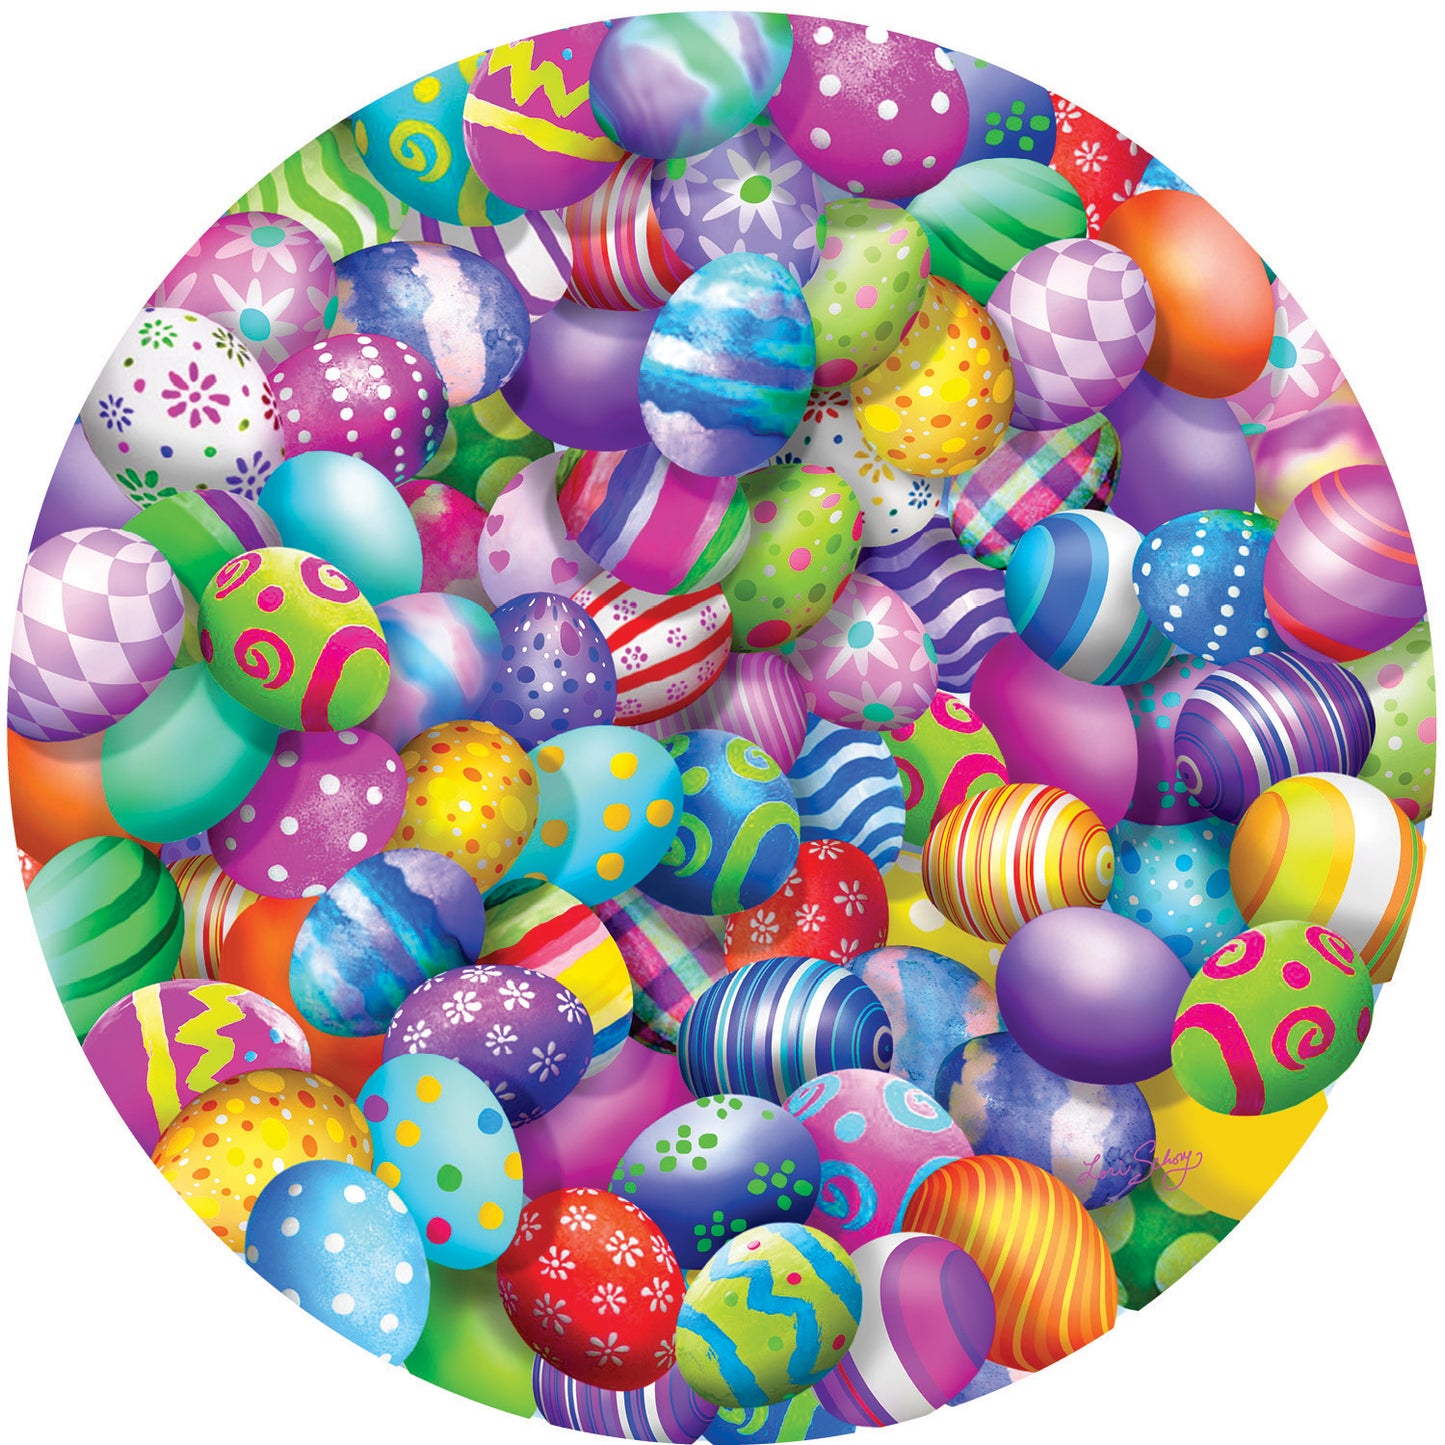 Easter Eggs - 500 Piece Jigsaw Puzzle